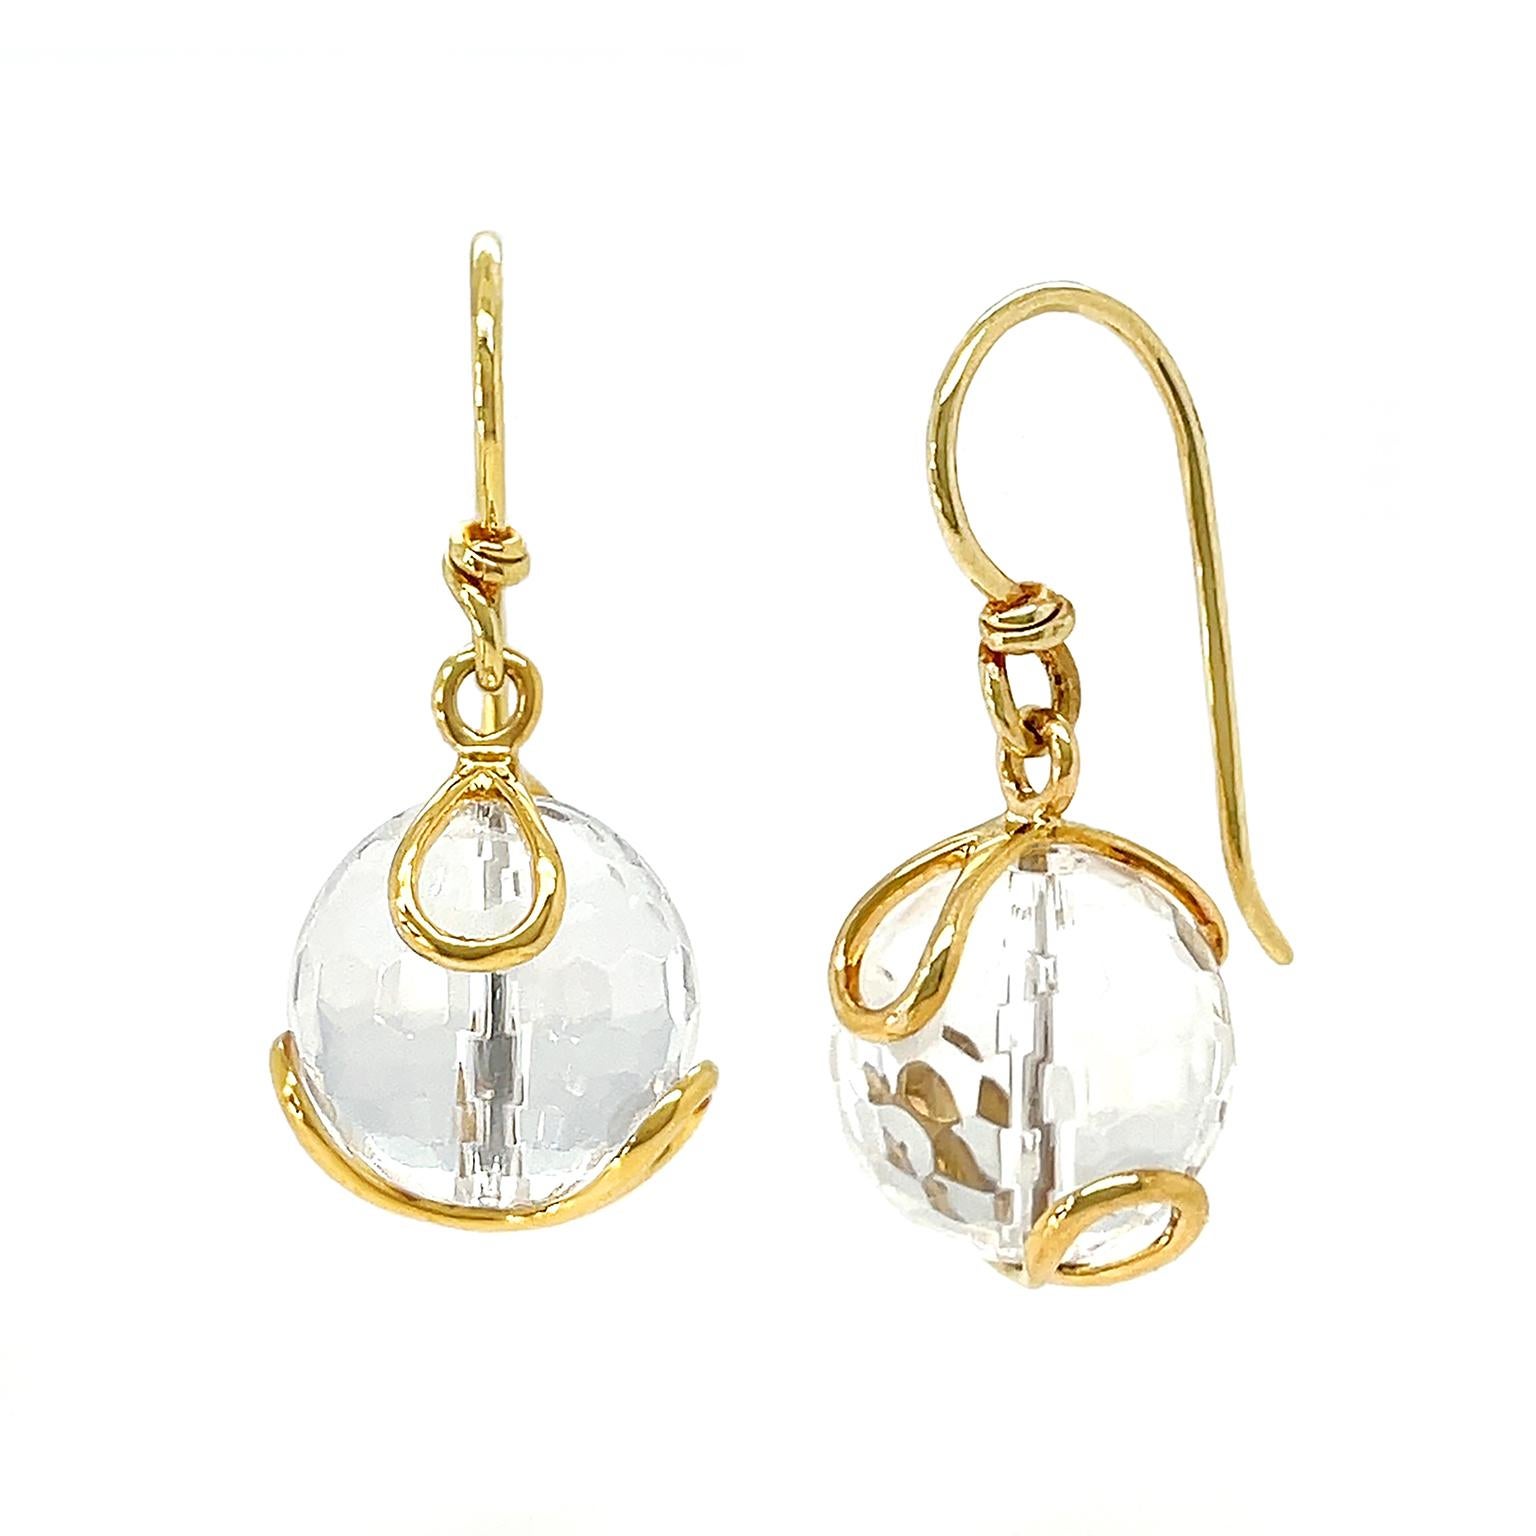 The shimmering translucency of crystal is showcased in these Carina earrings. A facetted globe of crystal produces flickers of light and soft shadows. 18k yellow gold loops secure the gem and French hooks join the ears to the earrings. The total